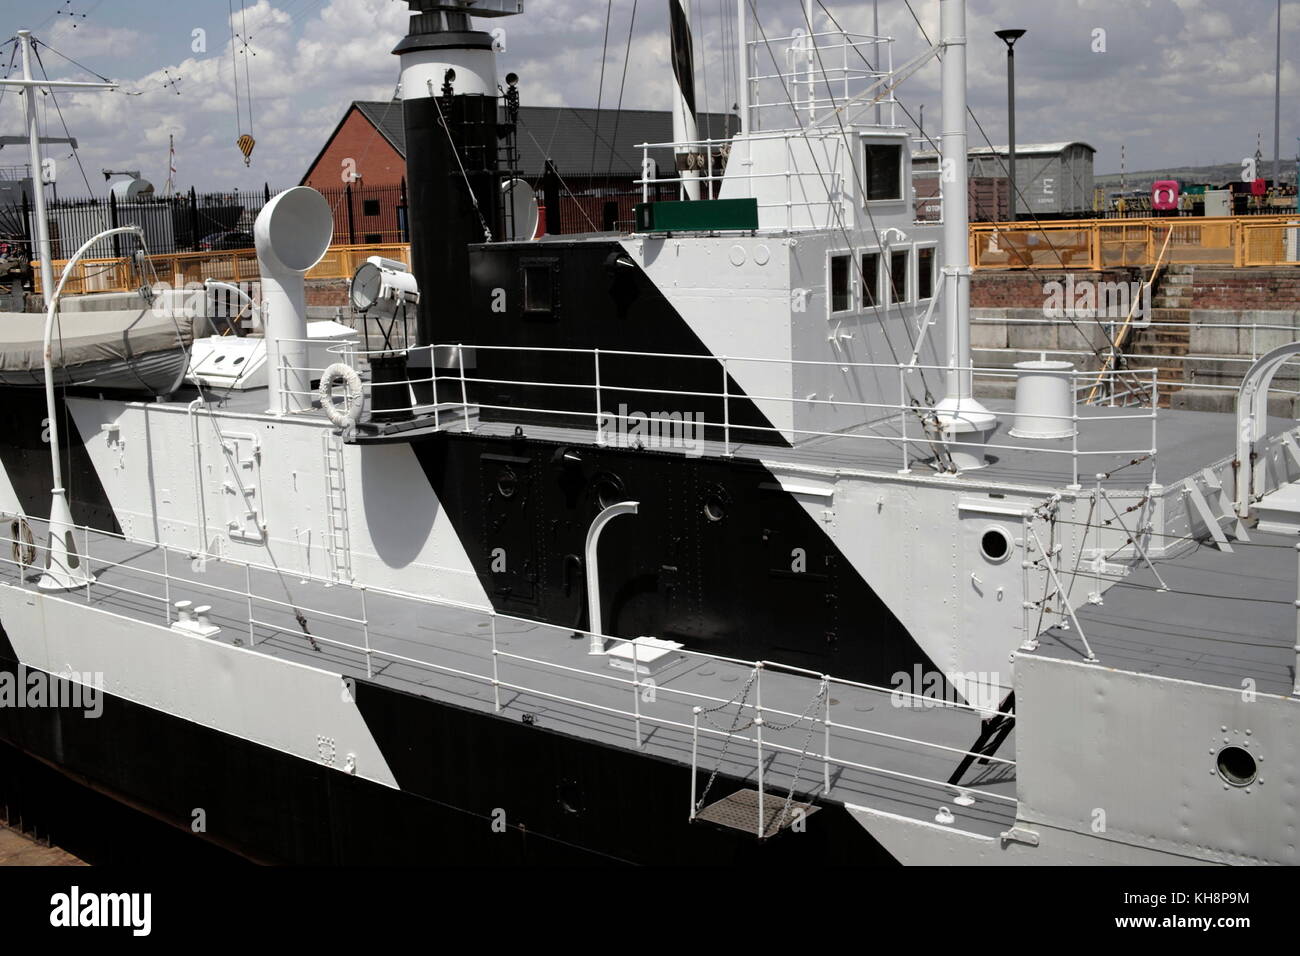 AJAXNETPHOTO. 15TH JUNE, 2009. PORTSMOUTH, ENGLAND. - M29 CLASS MONITOR, HMS M.33 IN SCHEDULED ANCIENT MONUMENT NO.1 DRY DOCK IN THE HISTORIC DOCKYARD. PHOTO:JONATHAN EASTLAND/AJAX REF:DP91506 53 Stock Photo